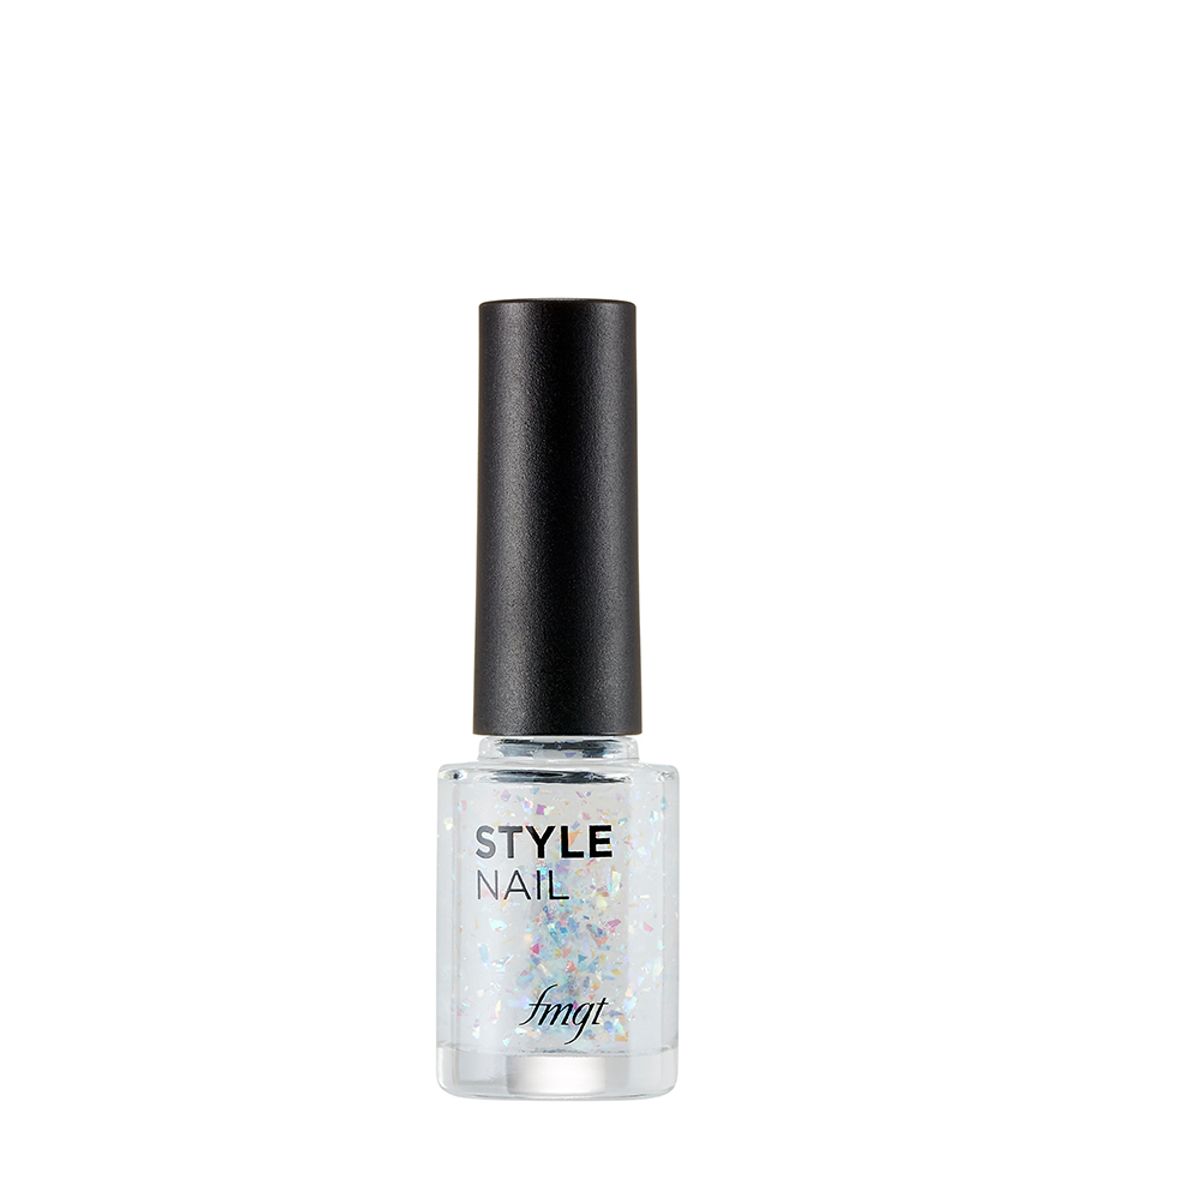 fmgt-son-mong-tay-thefaceshop-style-nail-7ml-5